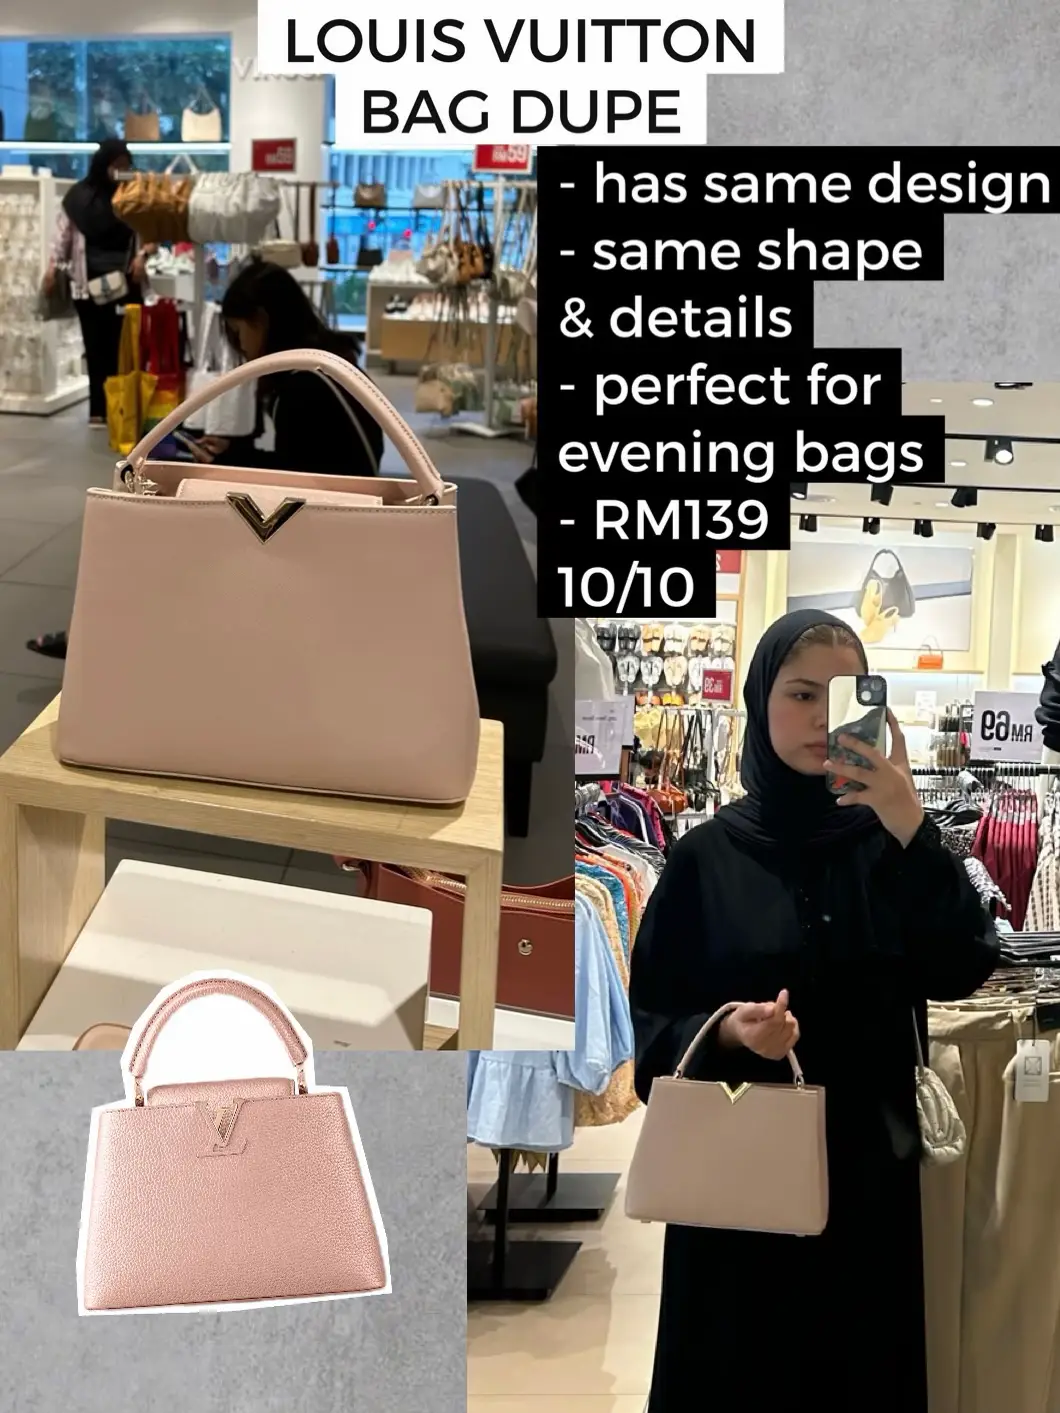 AFFORDABLE LUXURY BAG DUPES TRY ONS FROM PADINI